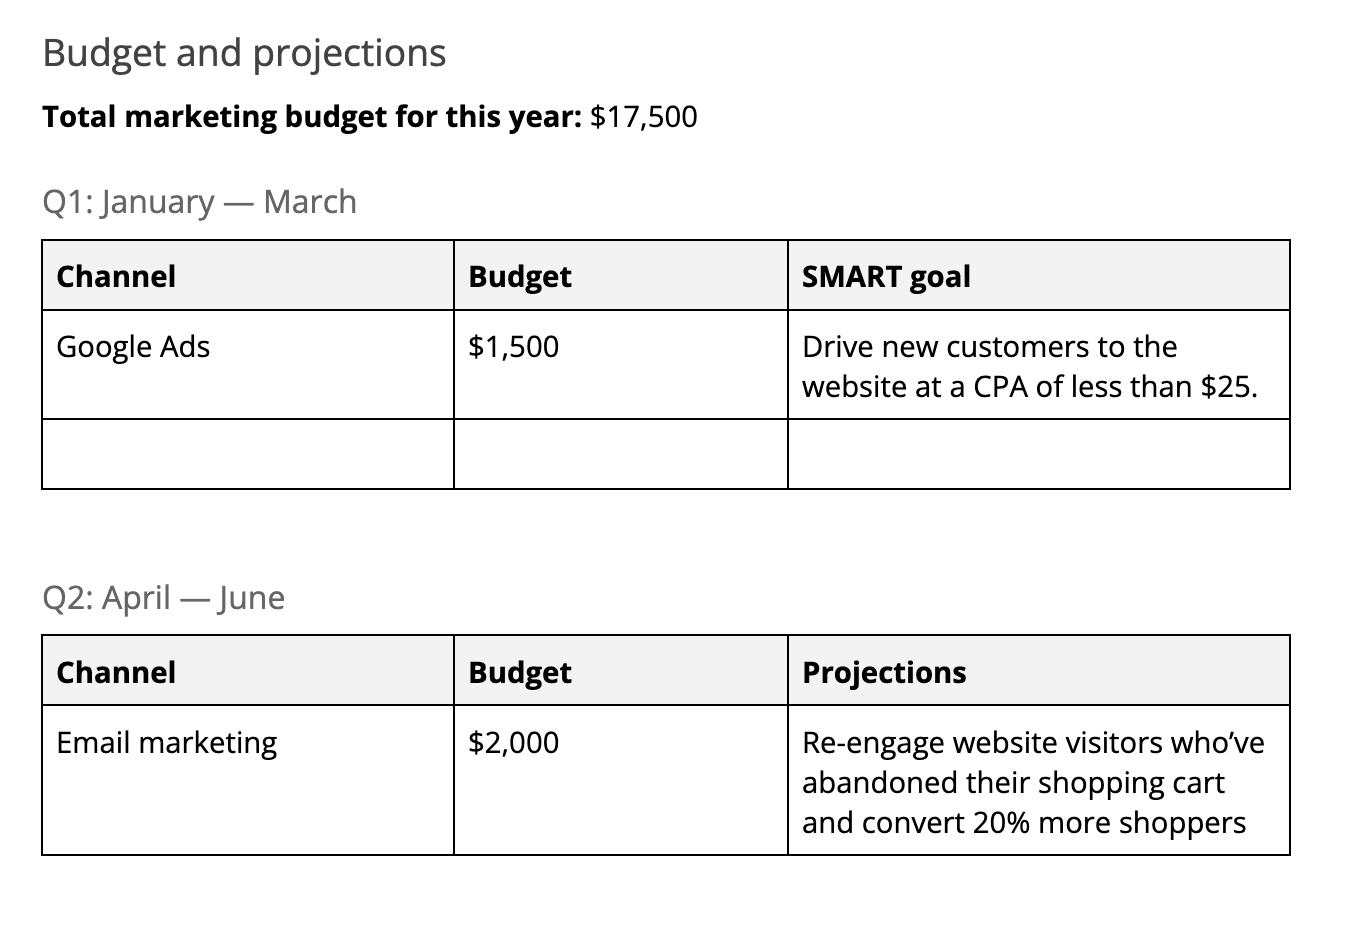 Marketing budget and projections example section of marketing plan template.